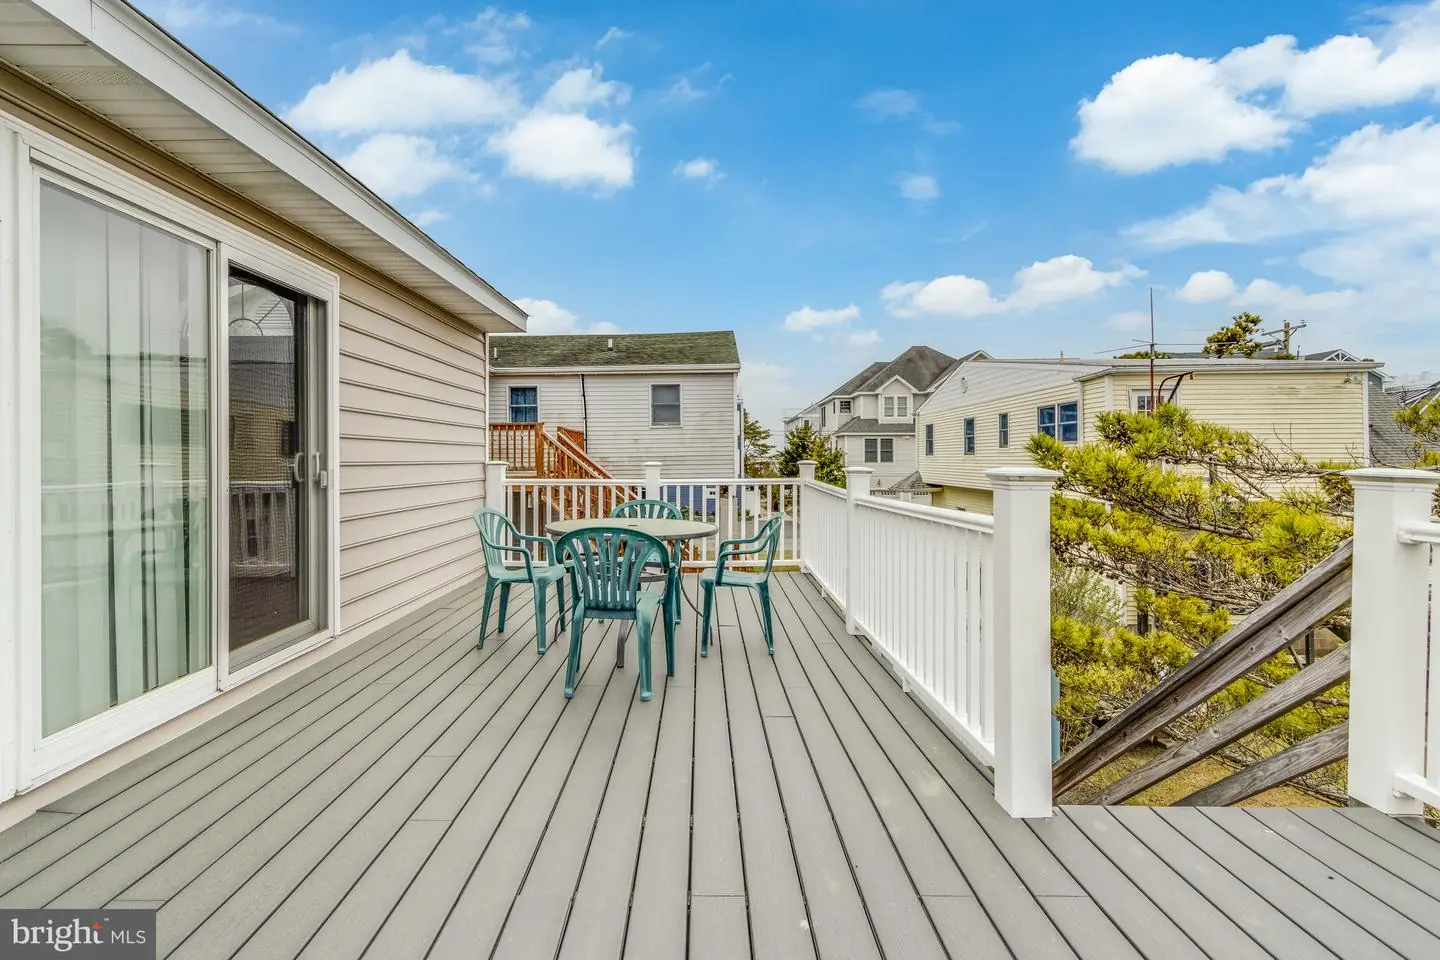 DESU2060190-803009595844-2024-04-21-00-08-05 35205 Hassell Ave | Bethany Beach, DE Real Estate For Sale | MLS# Desu2060190  - 1st Choice Properties